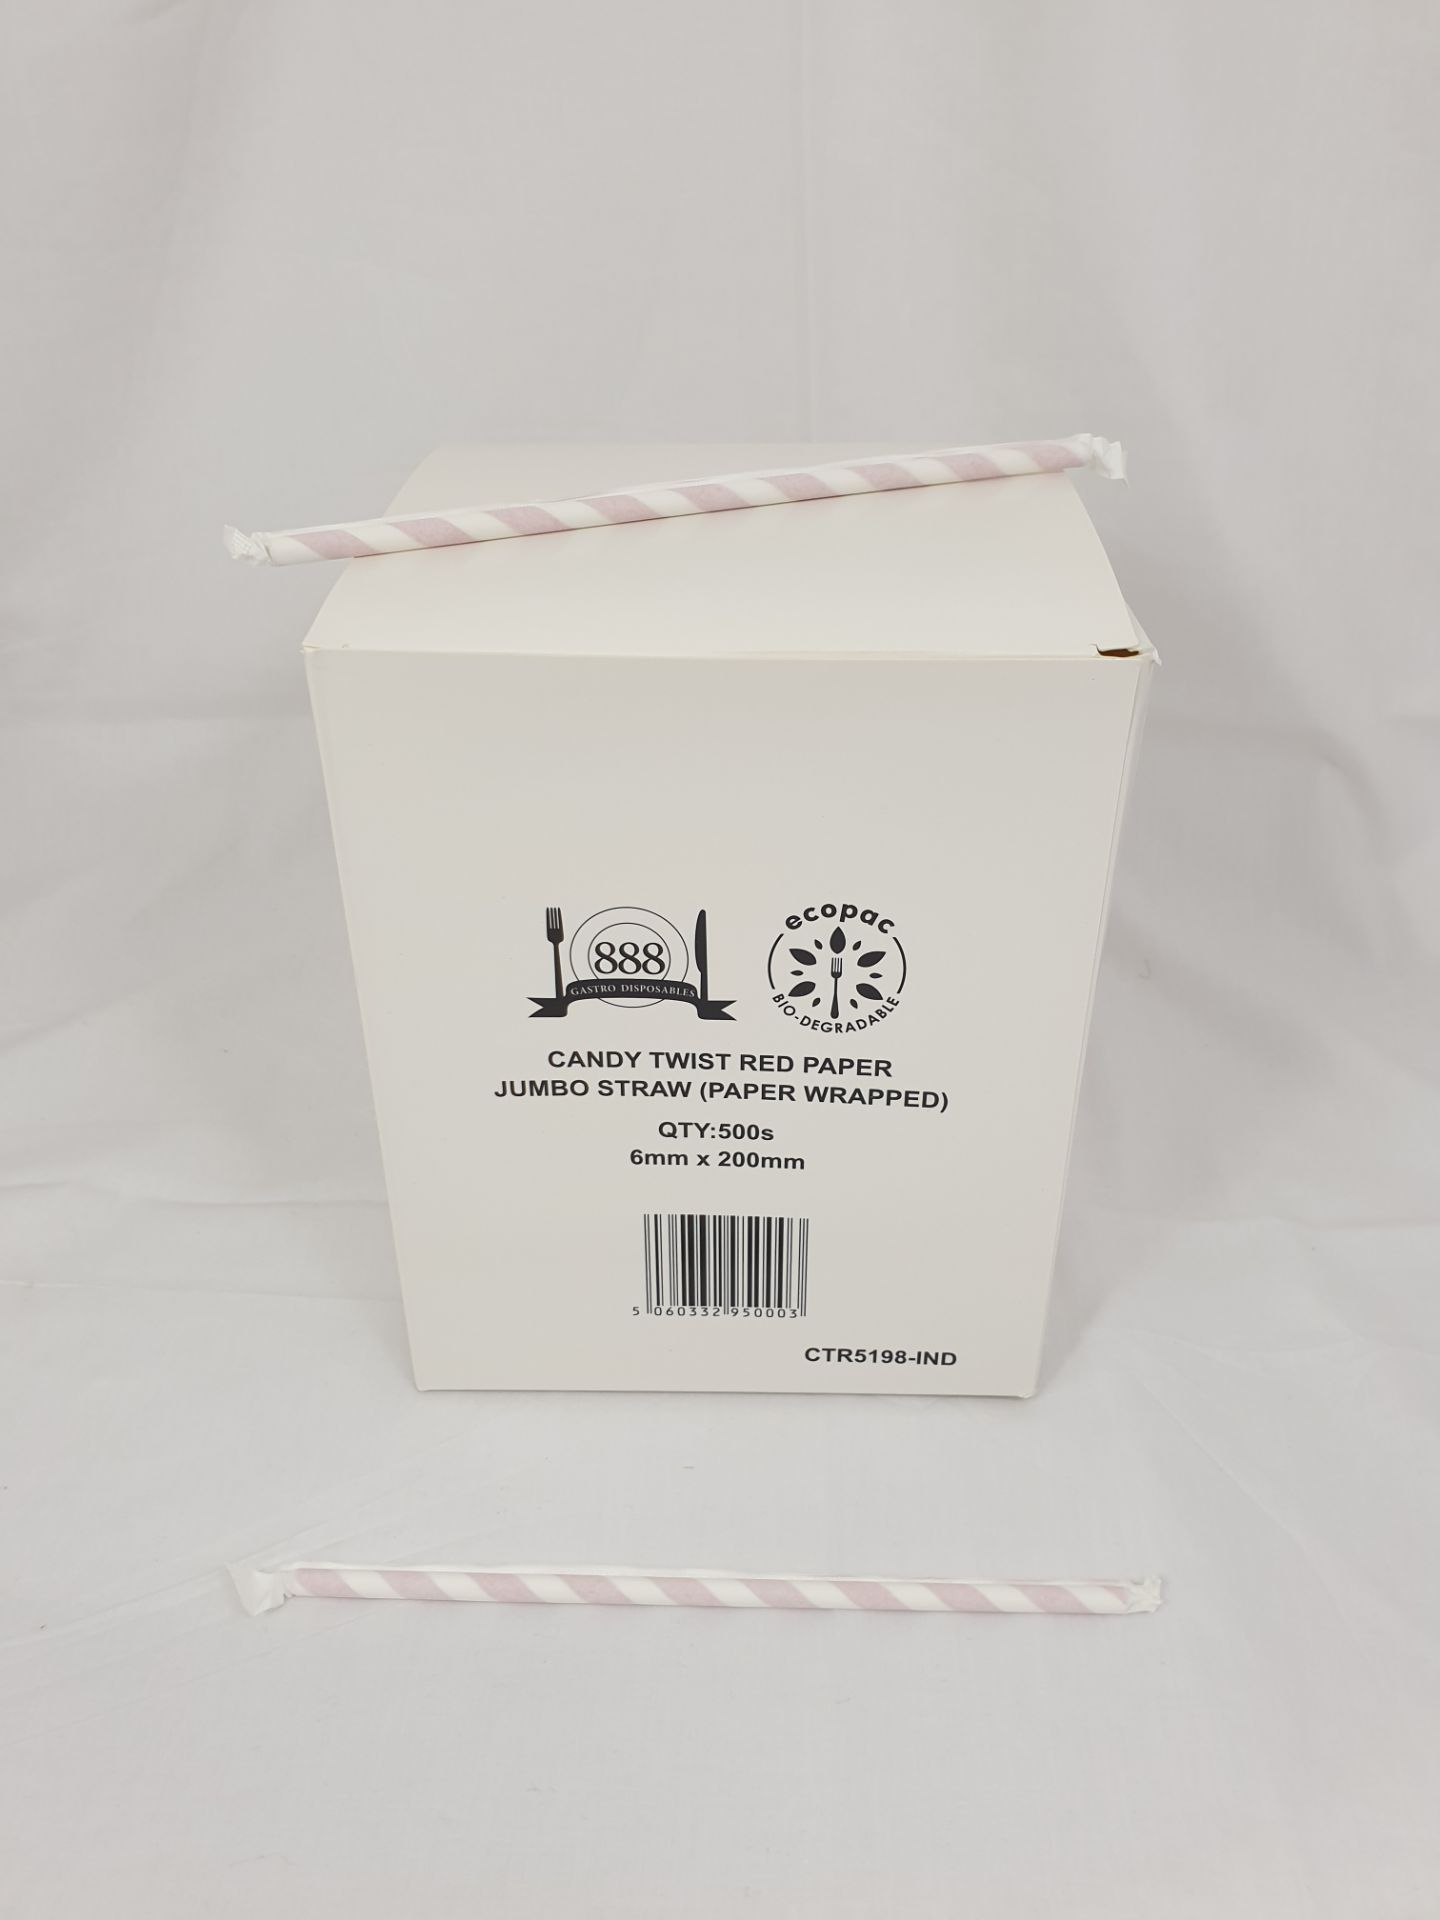 1 x Box of Candy Twist Paper Straws by 888 Gastro Disposables - Image 2 of 3